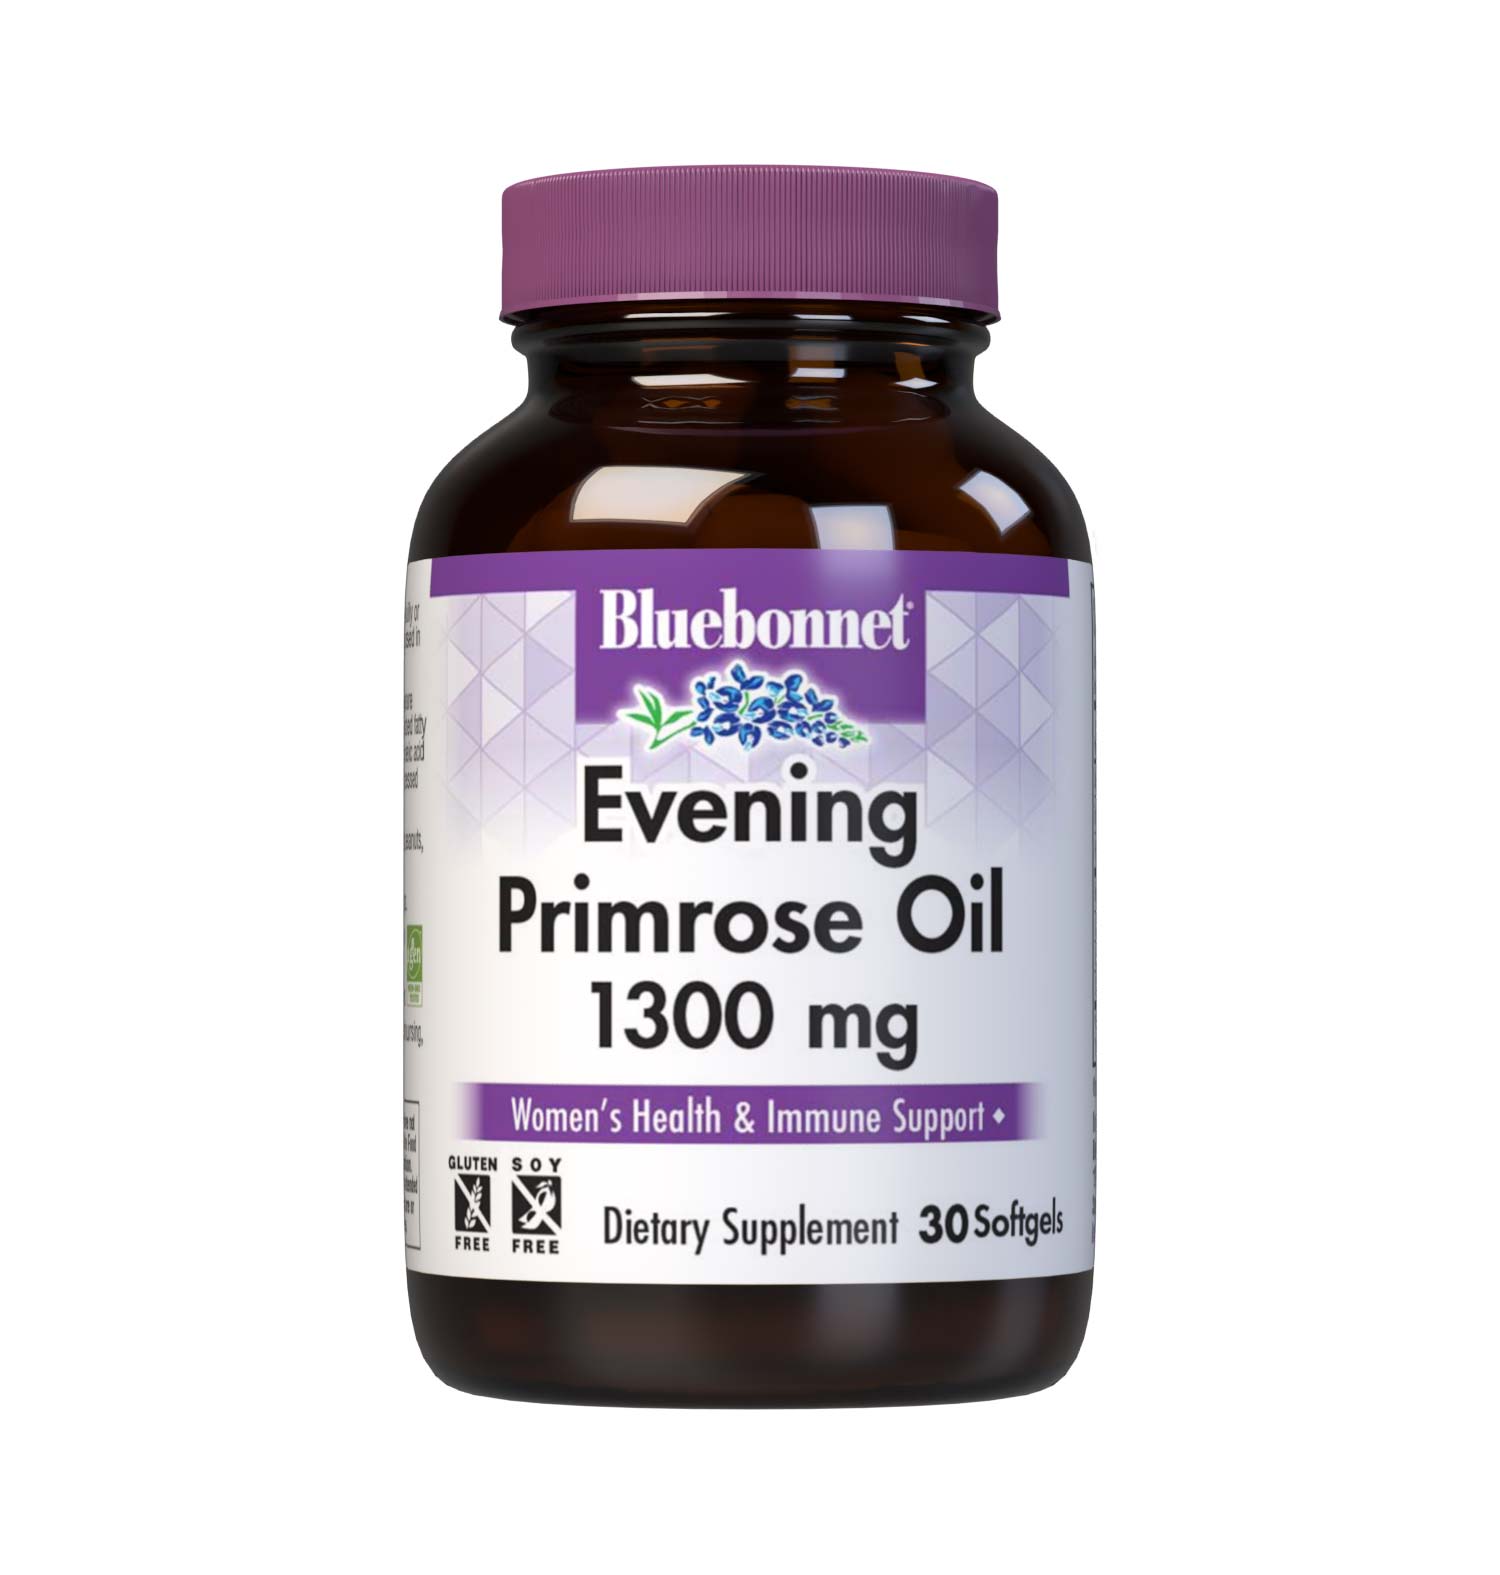 Bluebonnet’s Evening Primrose Oil 1300 mg 30 Softgels are formulated with an oil from the seed of the evening primrose seed oil, a source of unsaturated fatty acids- gamma linolenic acid (GLA), linolenic acid, and oleic acid to support women's health and immune health. Cold pressed without the use of chemical solvents. #size_30 count